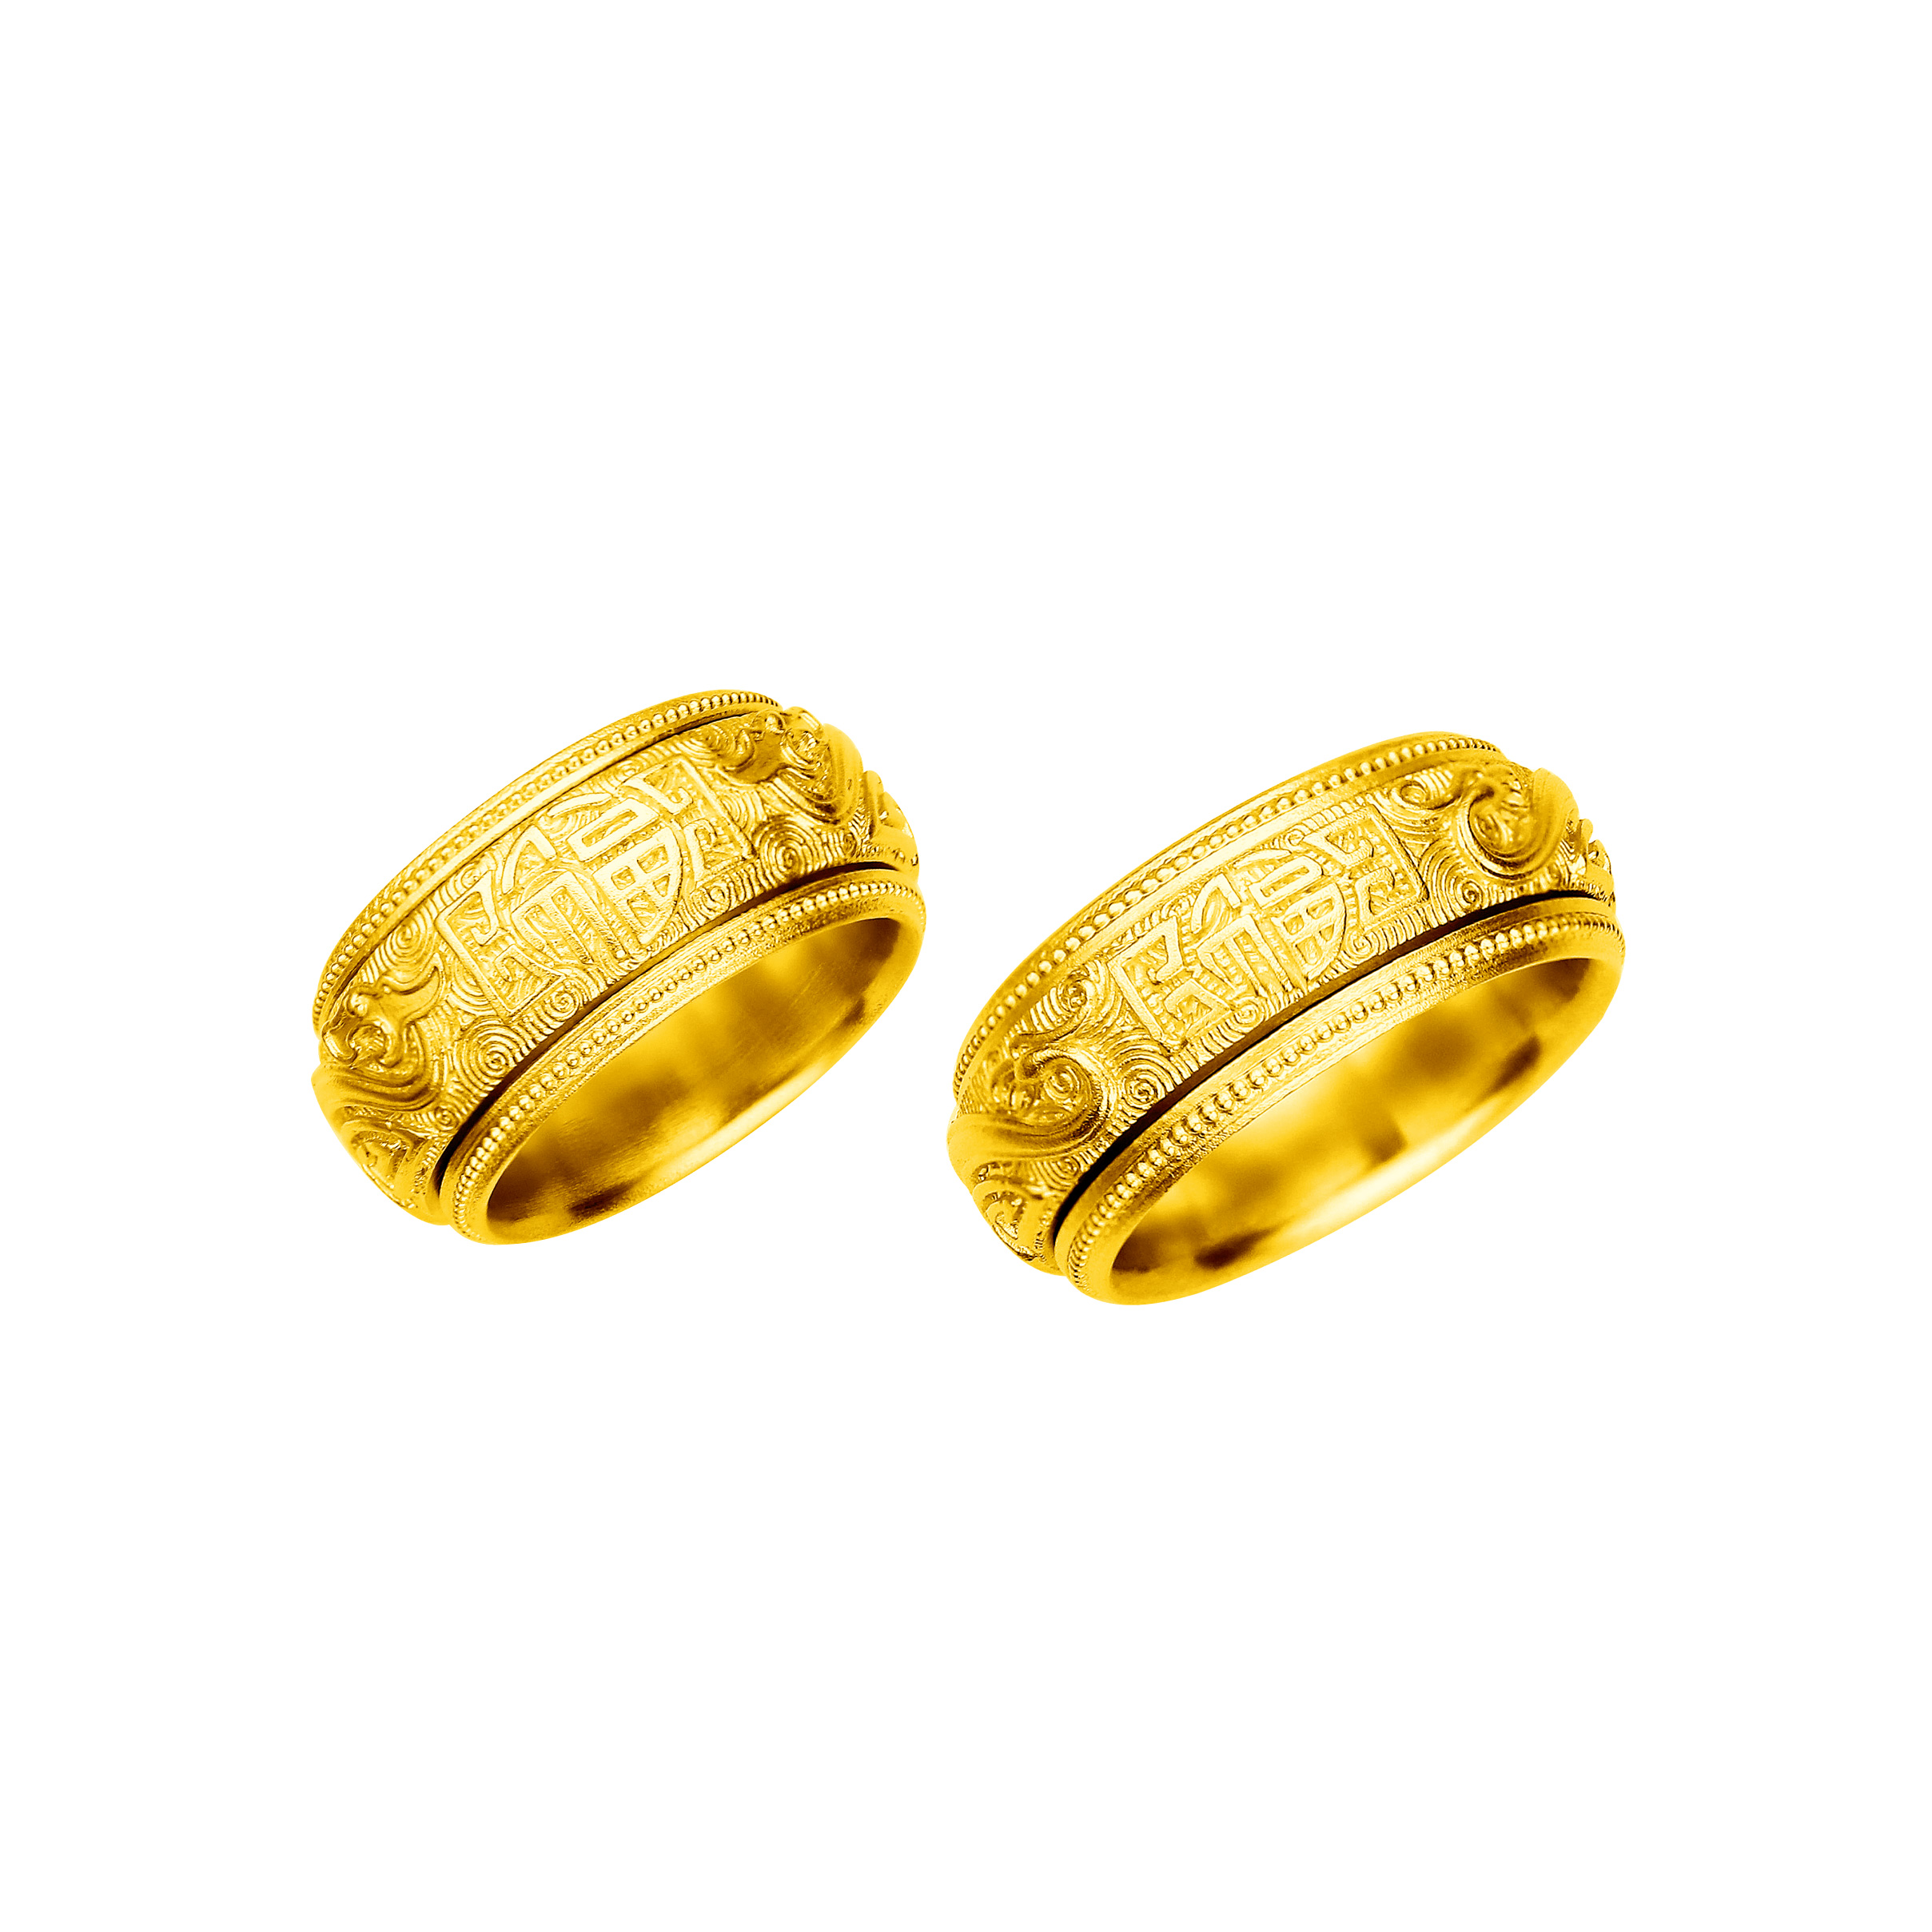 Antique Gold「慶福」Gold Rings